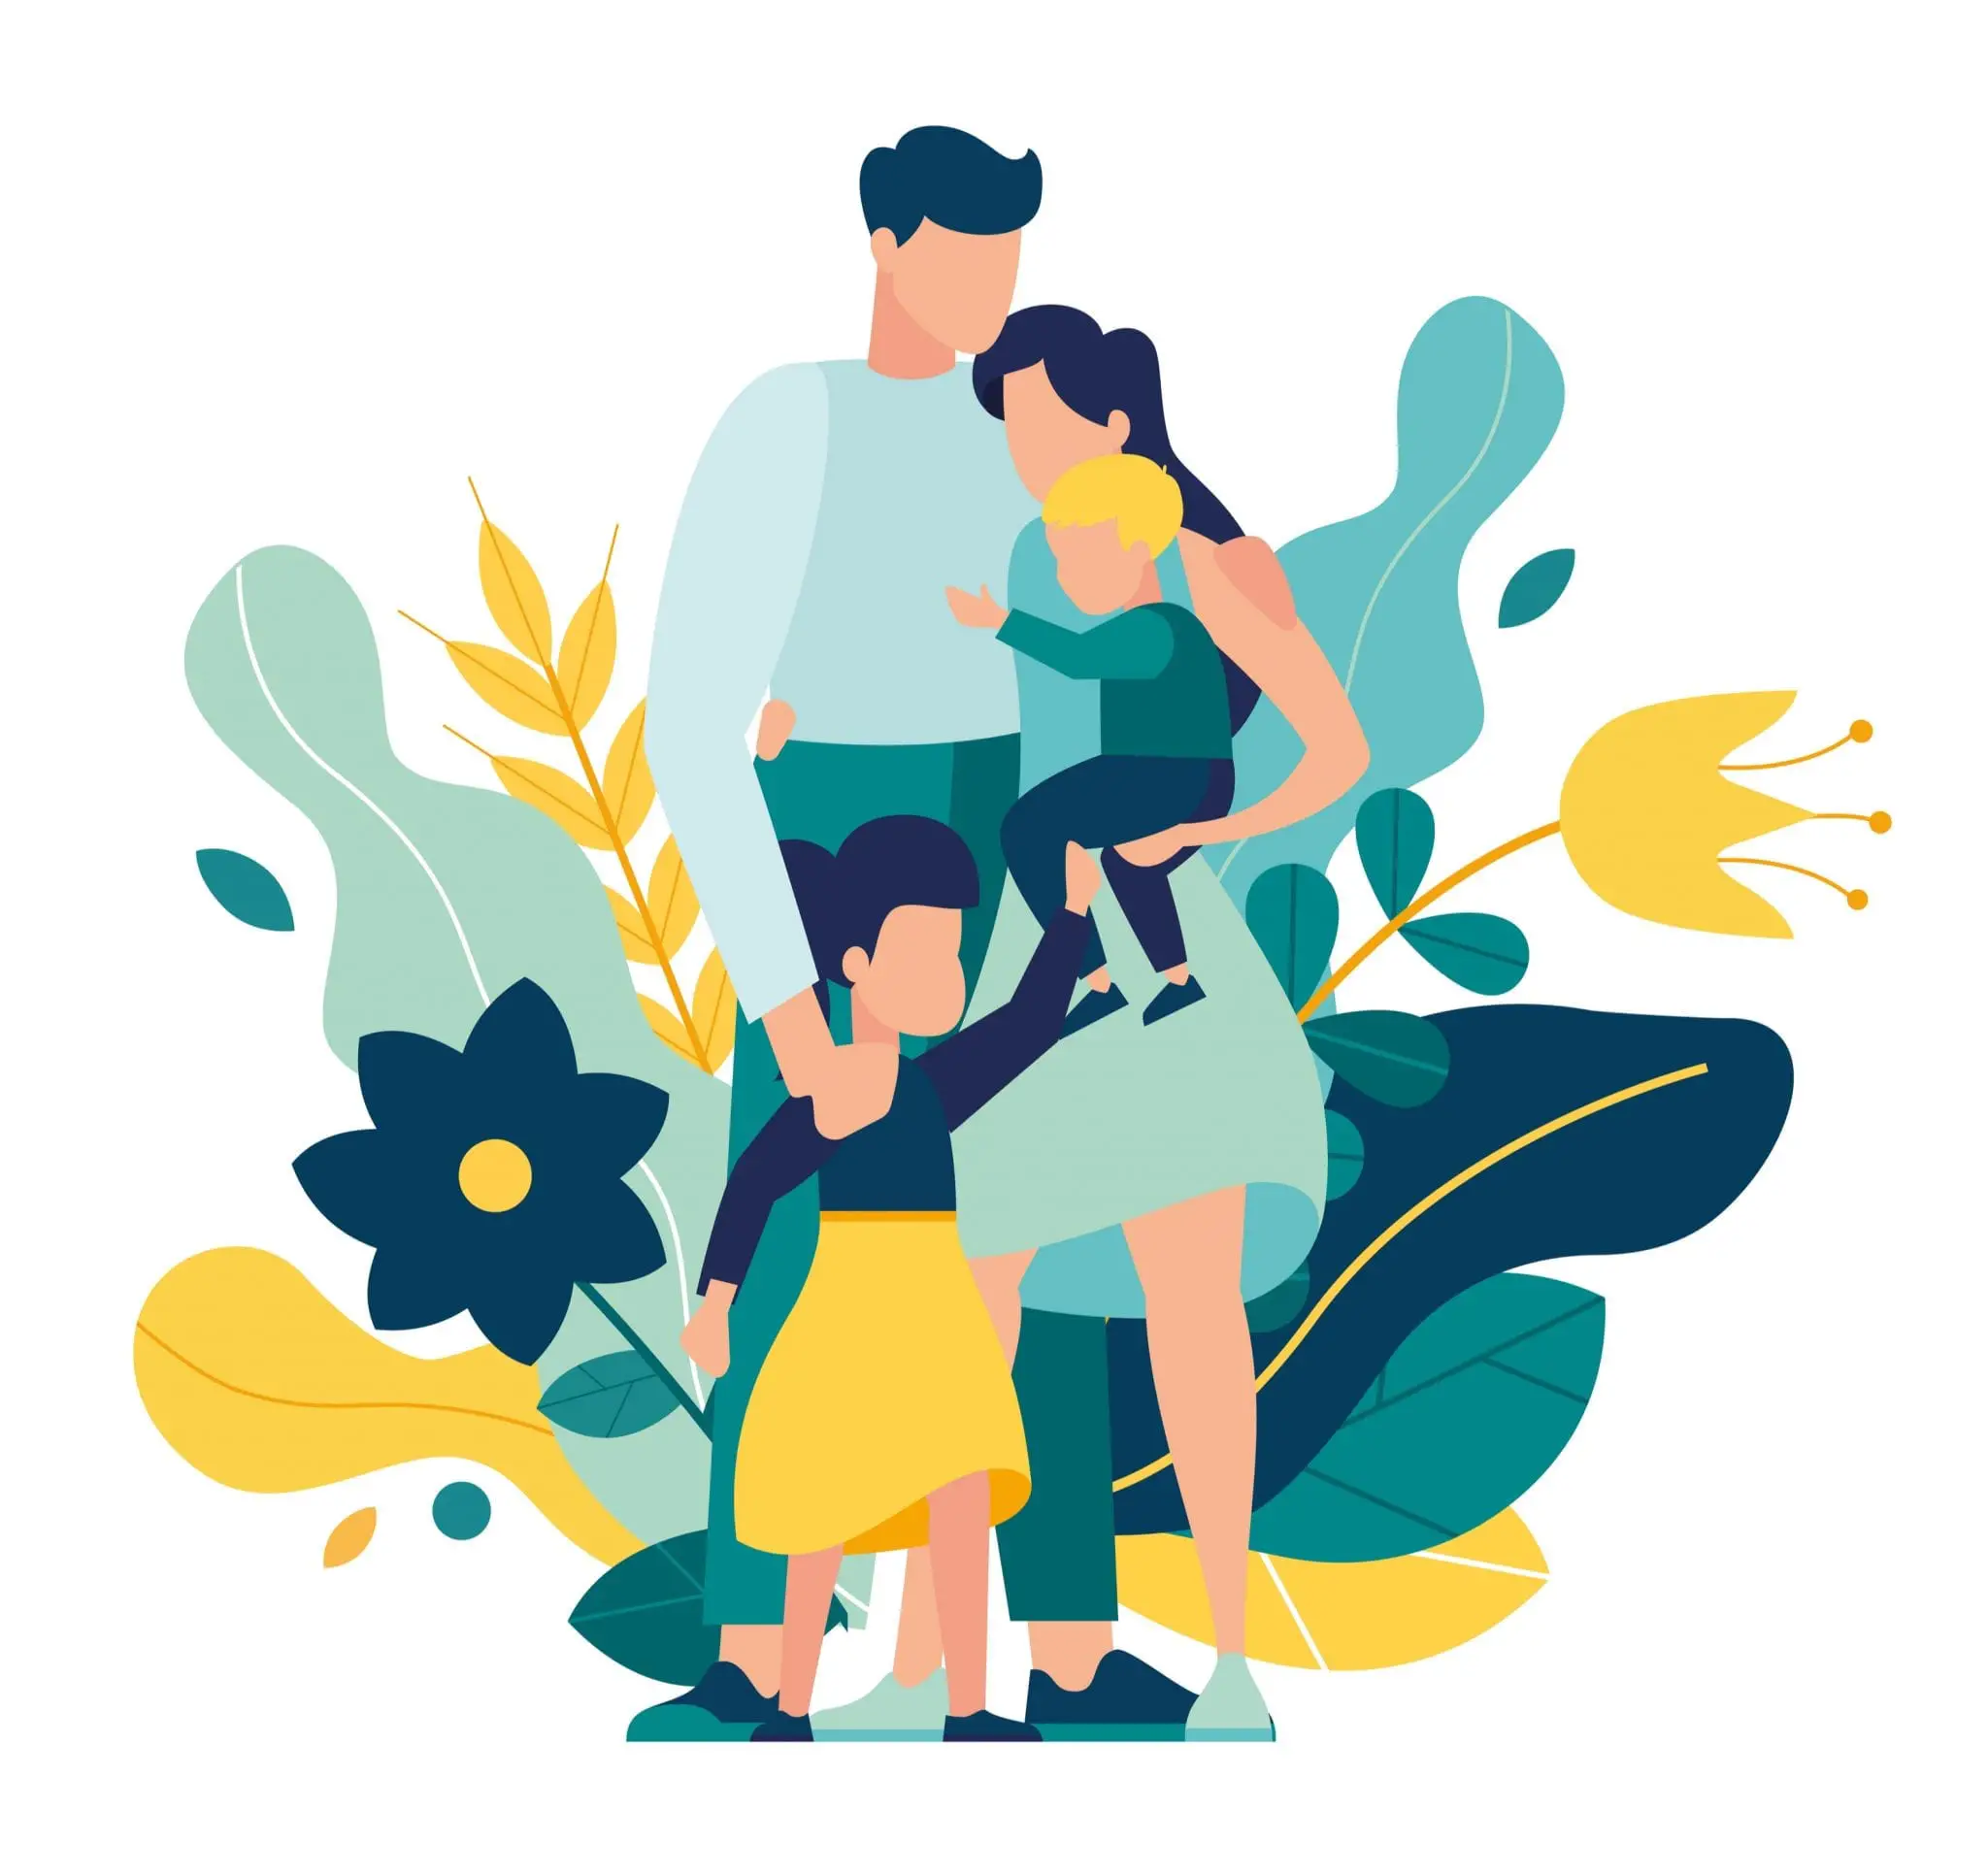 Portrait of Mother, Father and Children Illustration